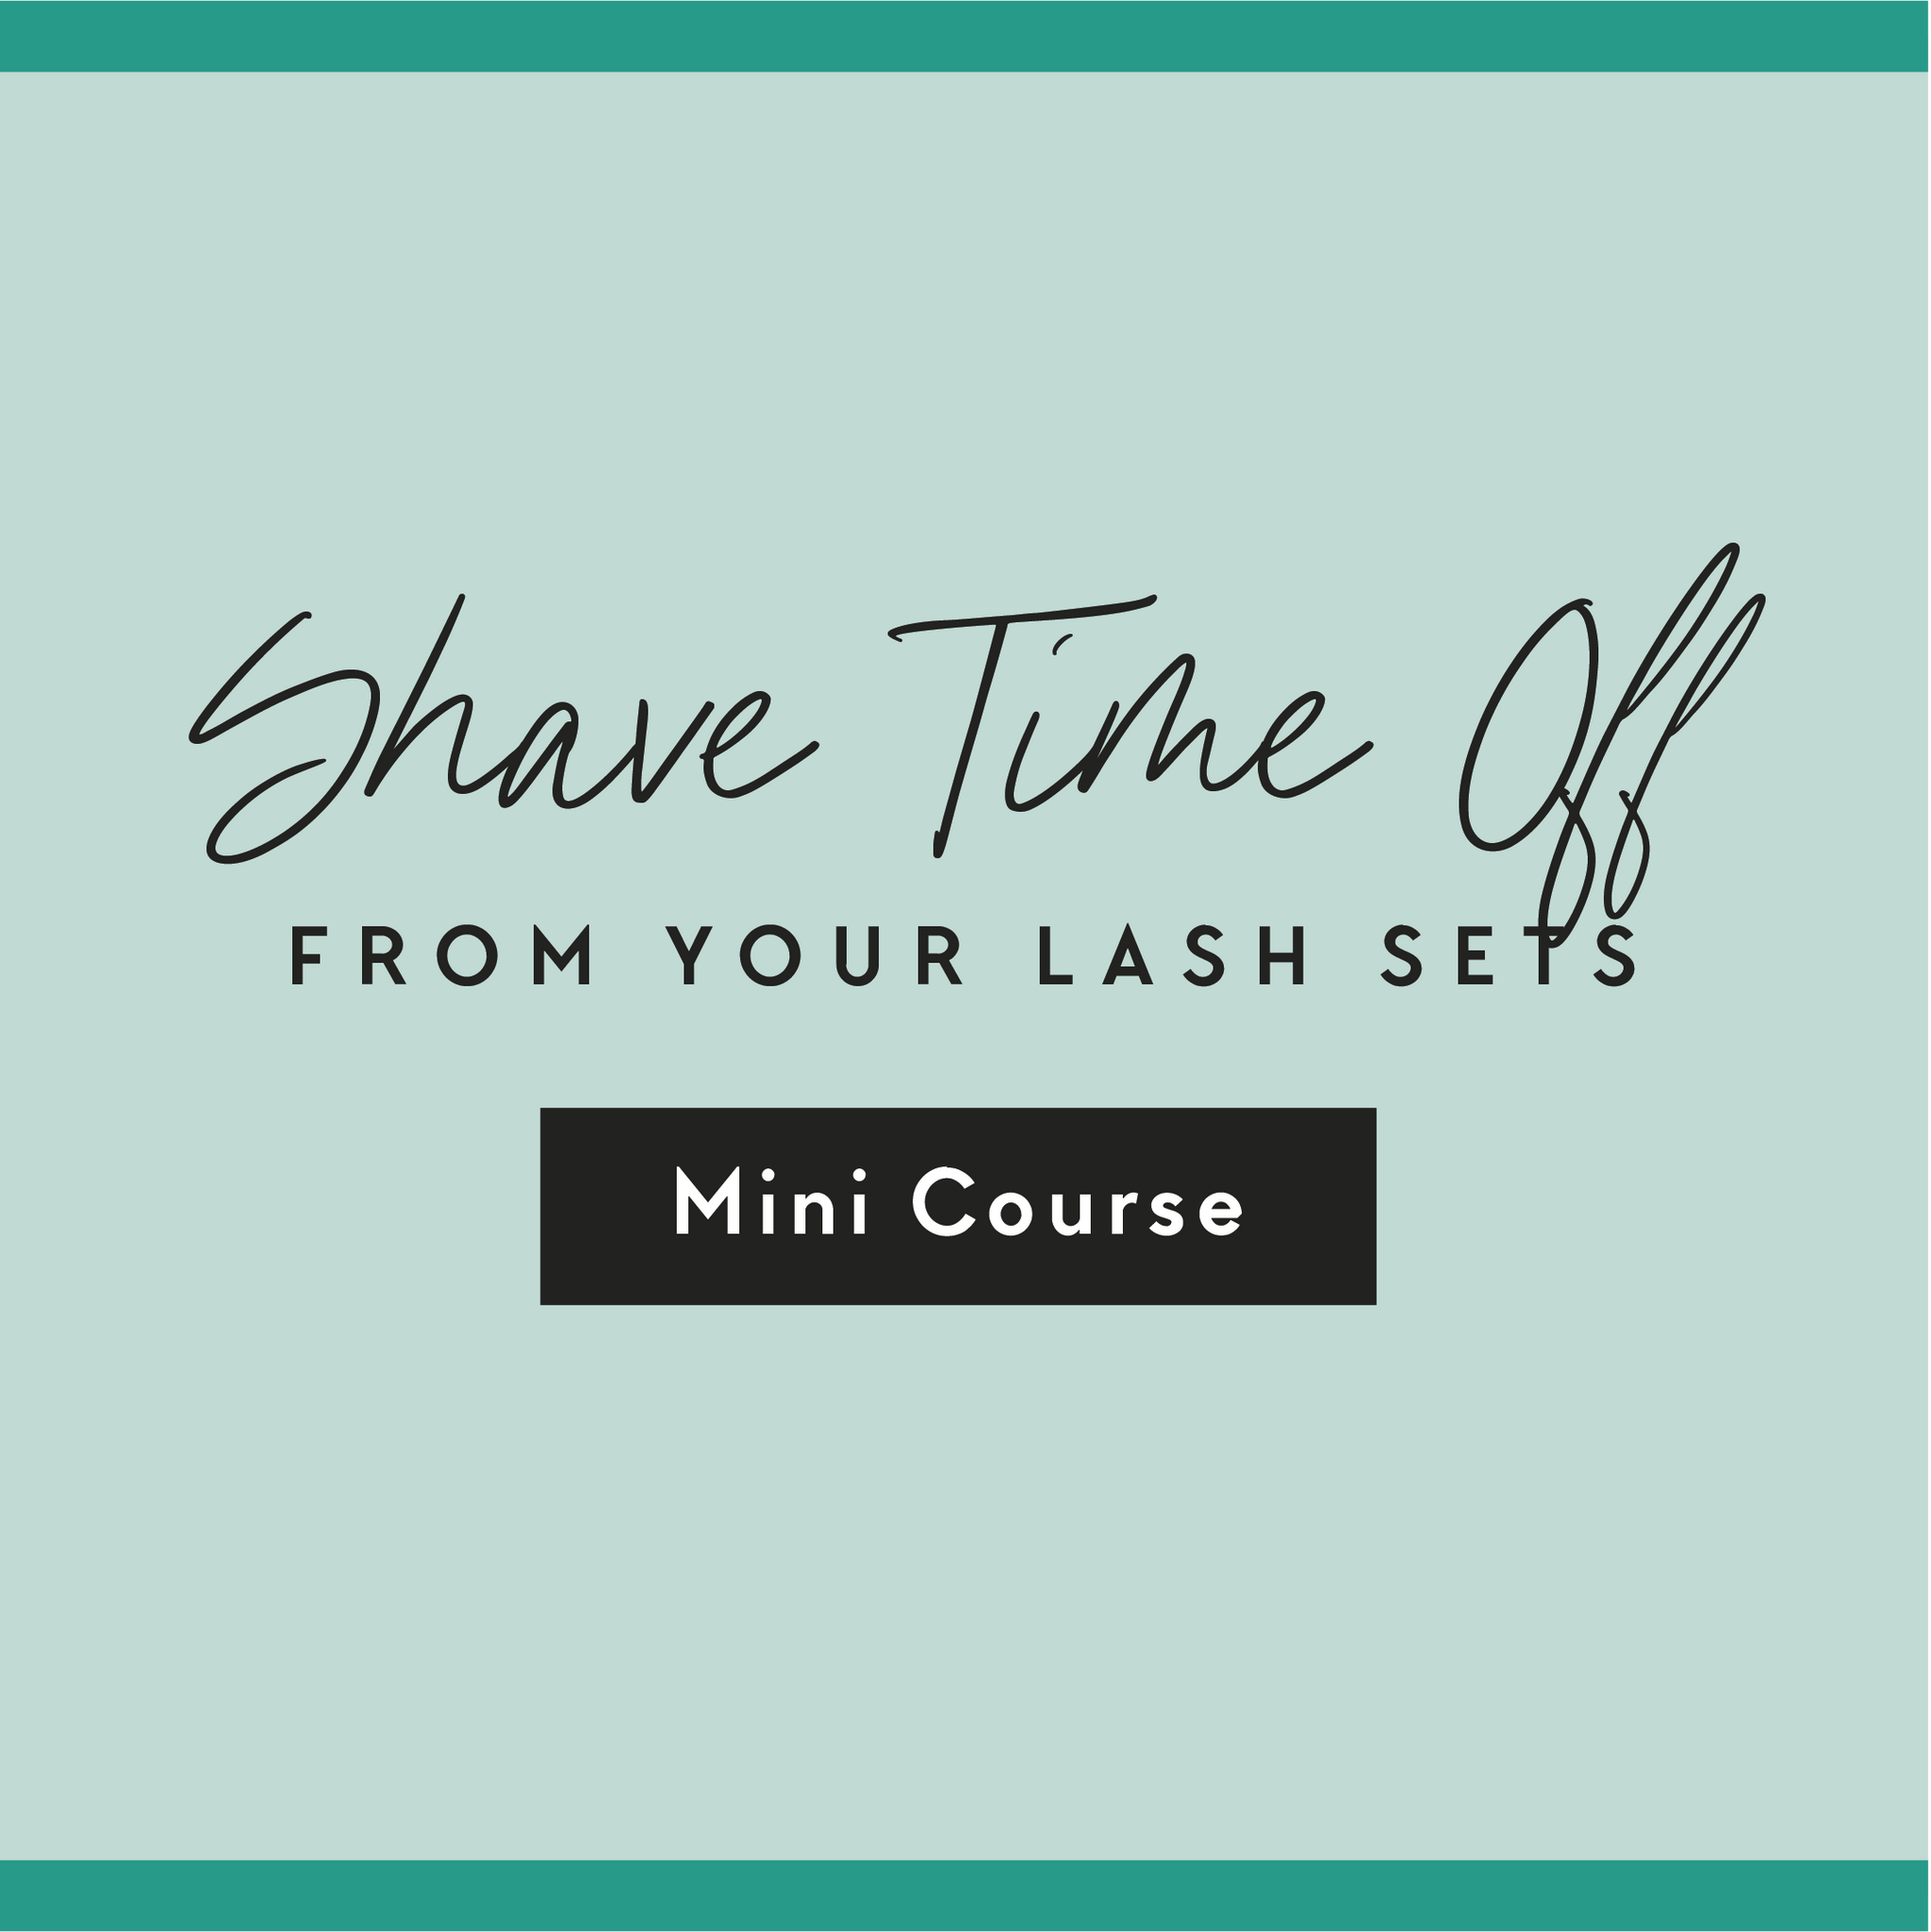 Shave Time Off From Your Lash Sets.